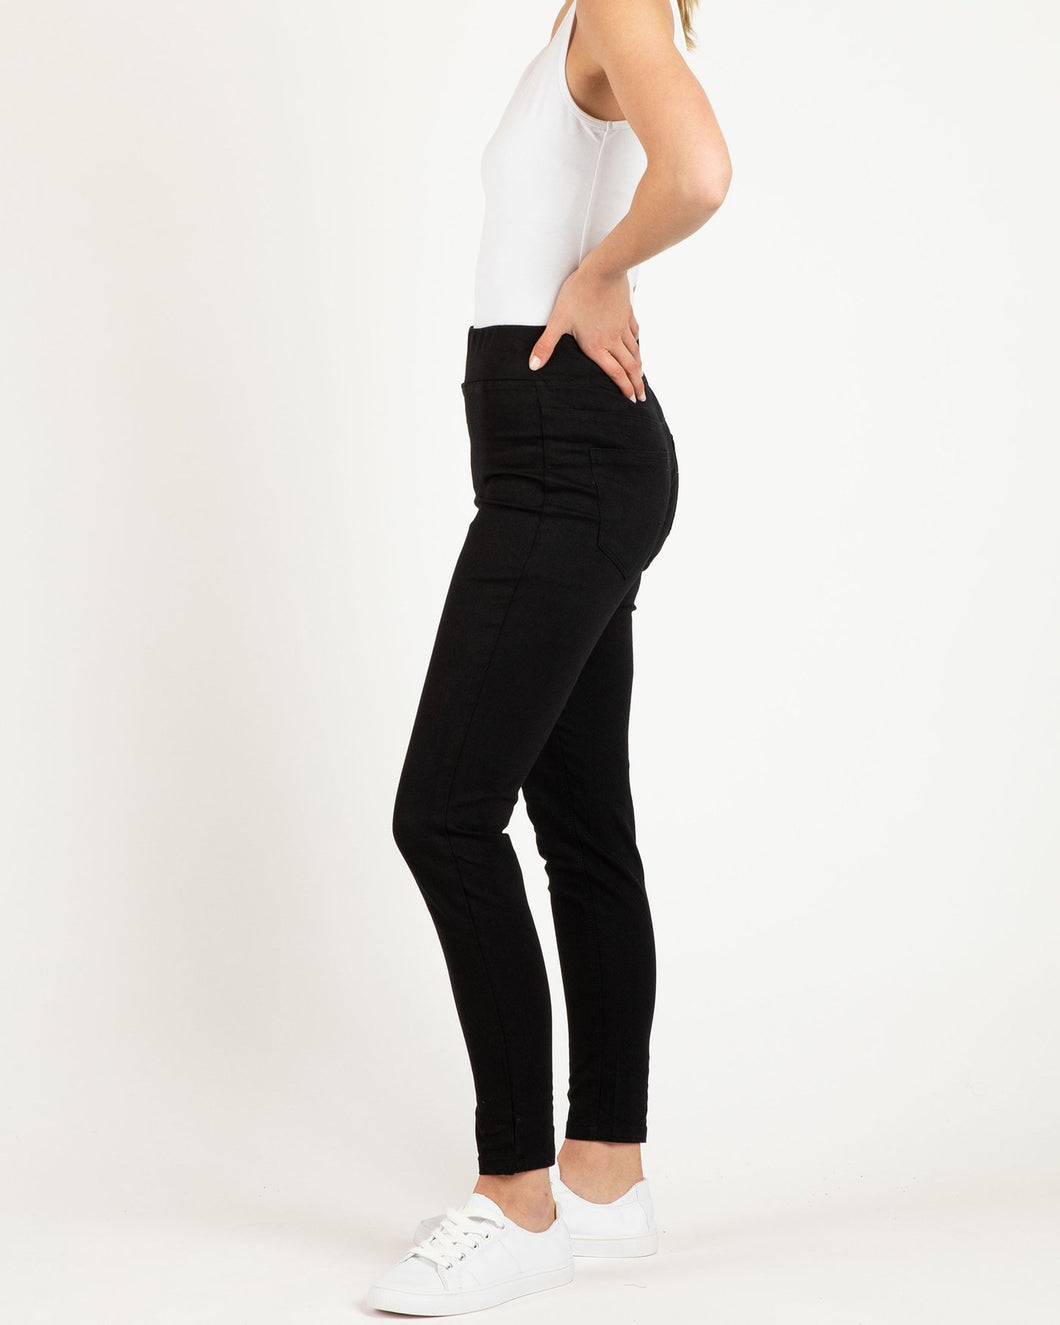 The Miller Stretch Jean goes with absolutely everything and is a wardrobe must have.  The thick elastic waistband makes these the comfiest jean ever whilst featuring a flattering mid rise fit.